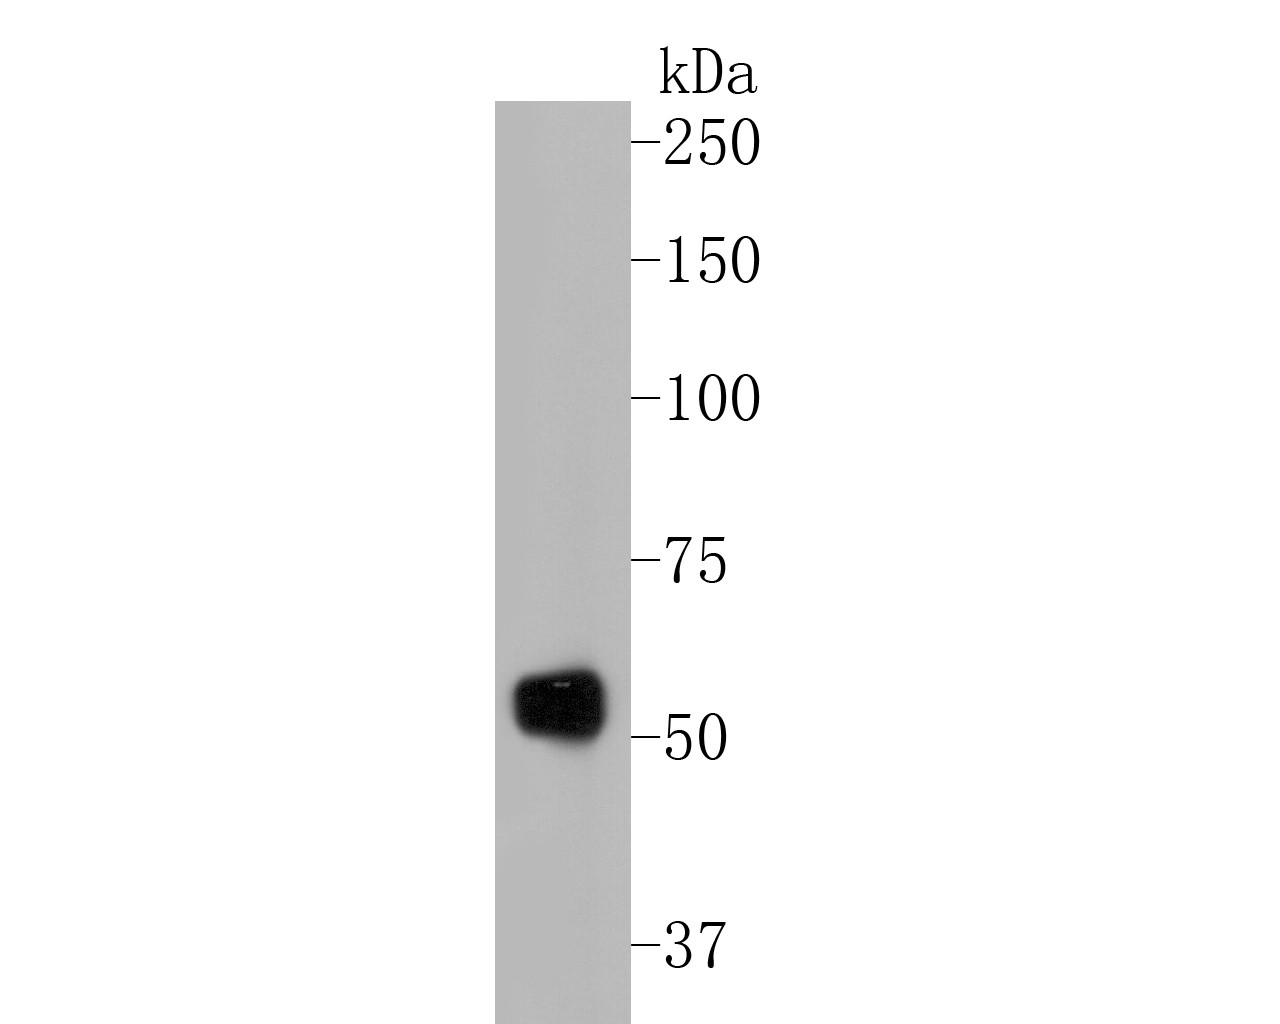 Western blot analysis of SERPINC1 on HL-60 cell lysates. Proteins were transferred to a PVDF membrane and blocked with 5% BSA in PBS for 1 hour at room temperature. The primary antibody (EM1901-11, 1/500) was used in 5% BSA at room temperature for 2 hours. Goat Anti-Mouse IgG - HRP Secondary Antibody (HA1006) at 1:5,000 dilution was used for 1 hour at room temperature.